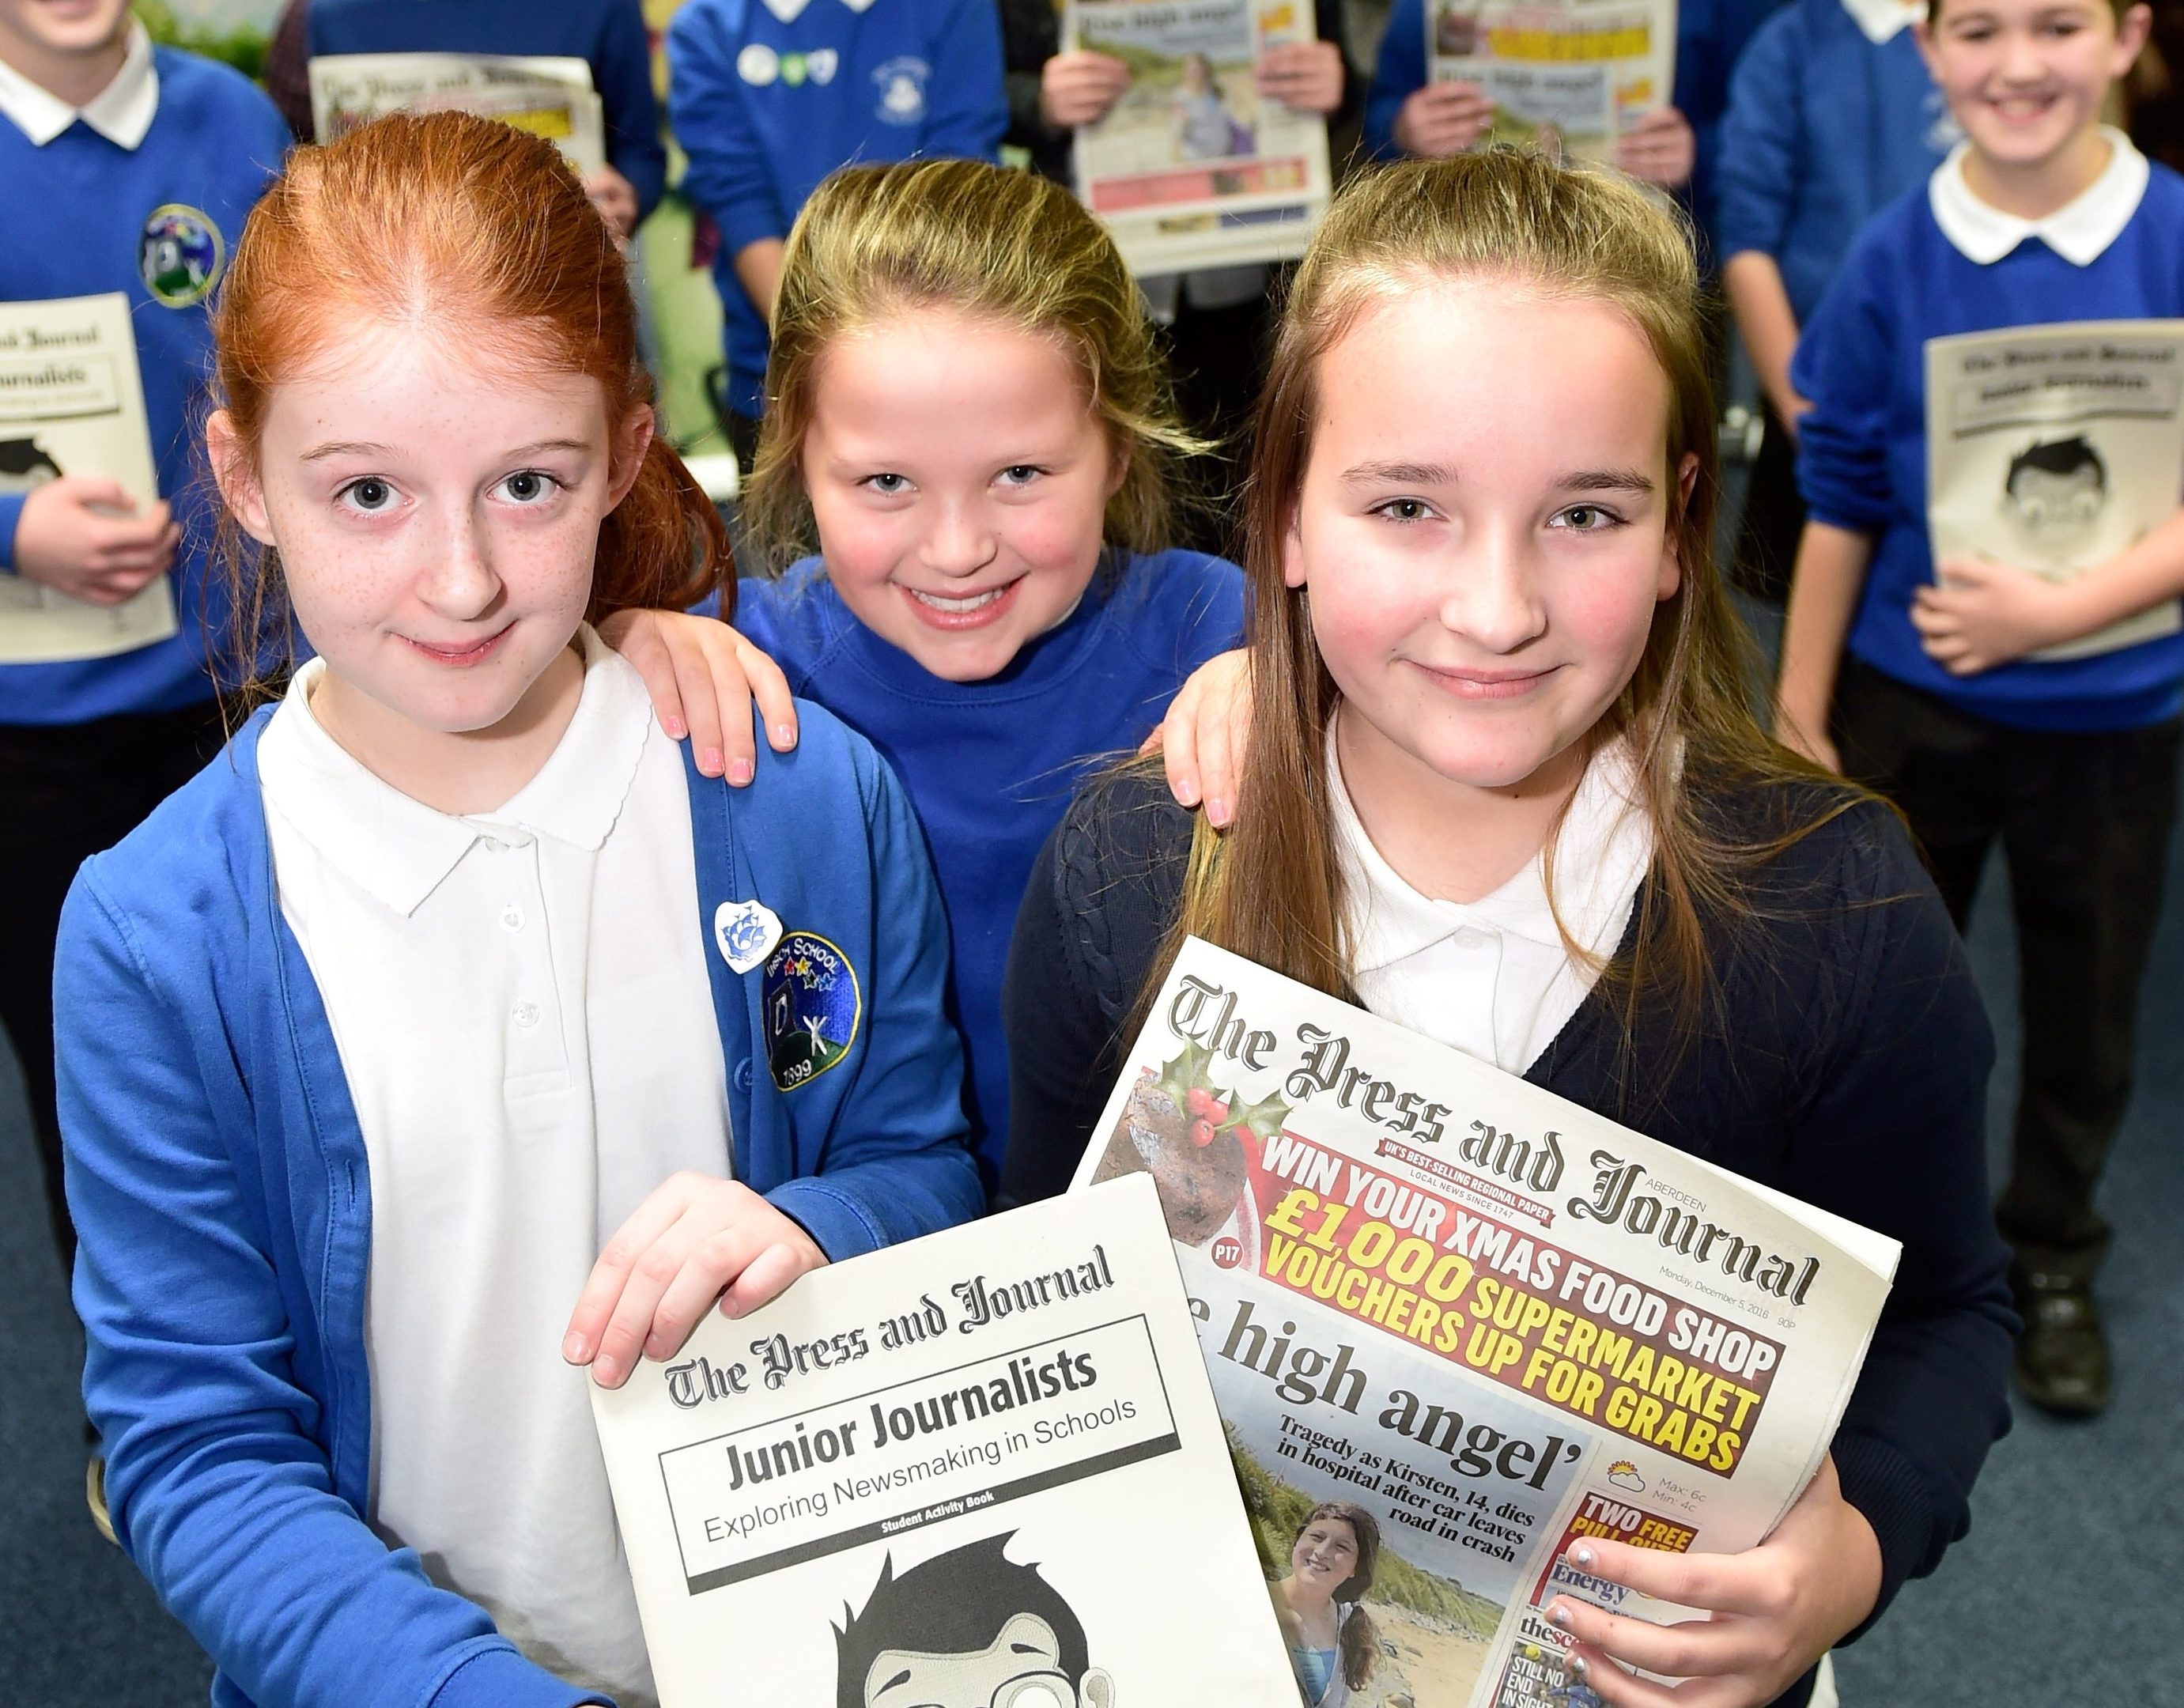 Pupils from Insch Primary School newspaper group visited the Press and Journal offices as part of the junior journalist competition.     
Picture by Kami Thomson